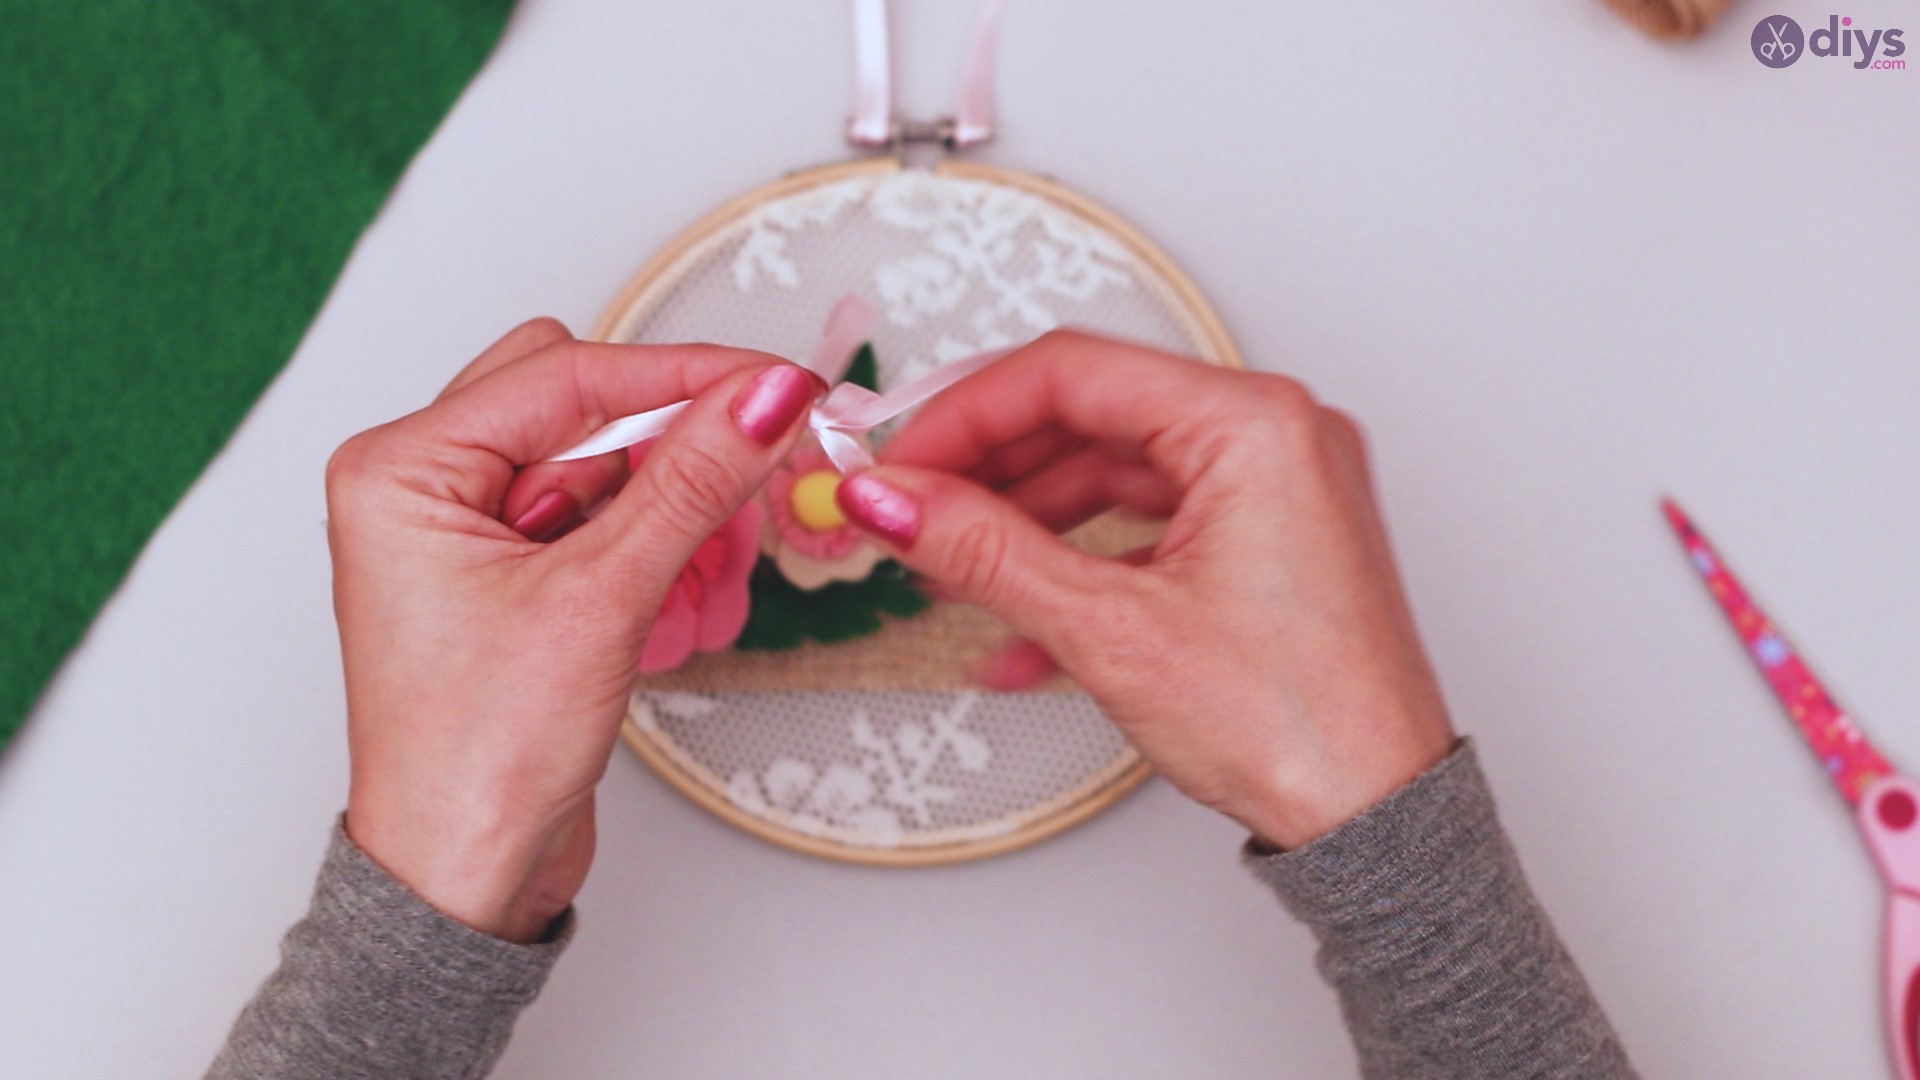 Diy embroidery hoop wall decor tutorial step by step (67)